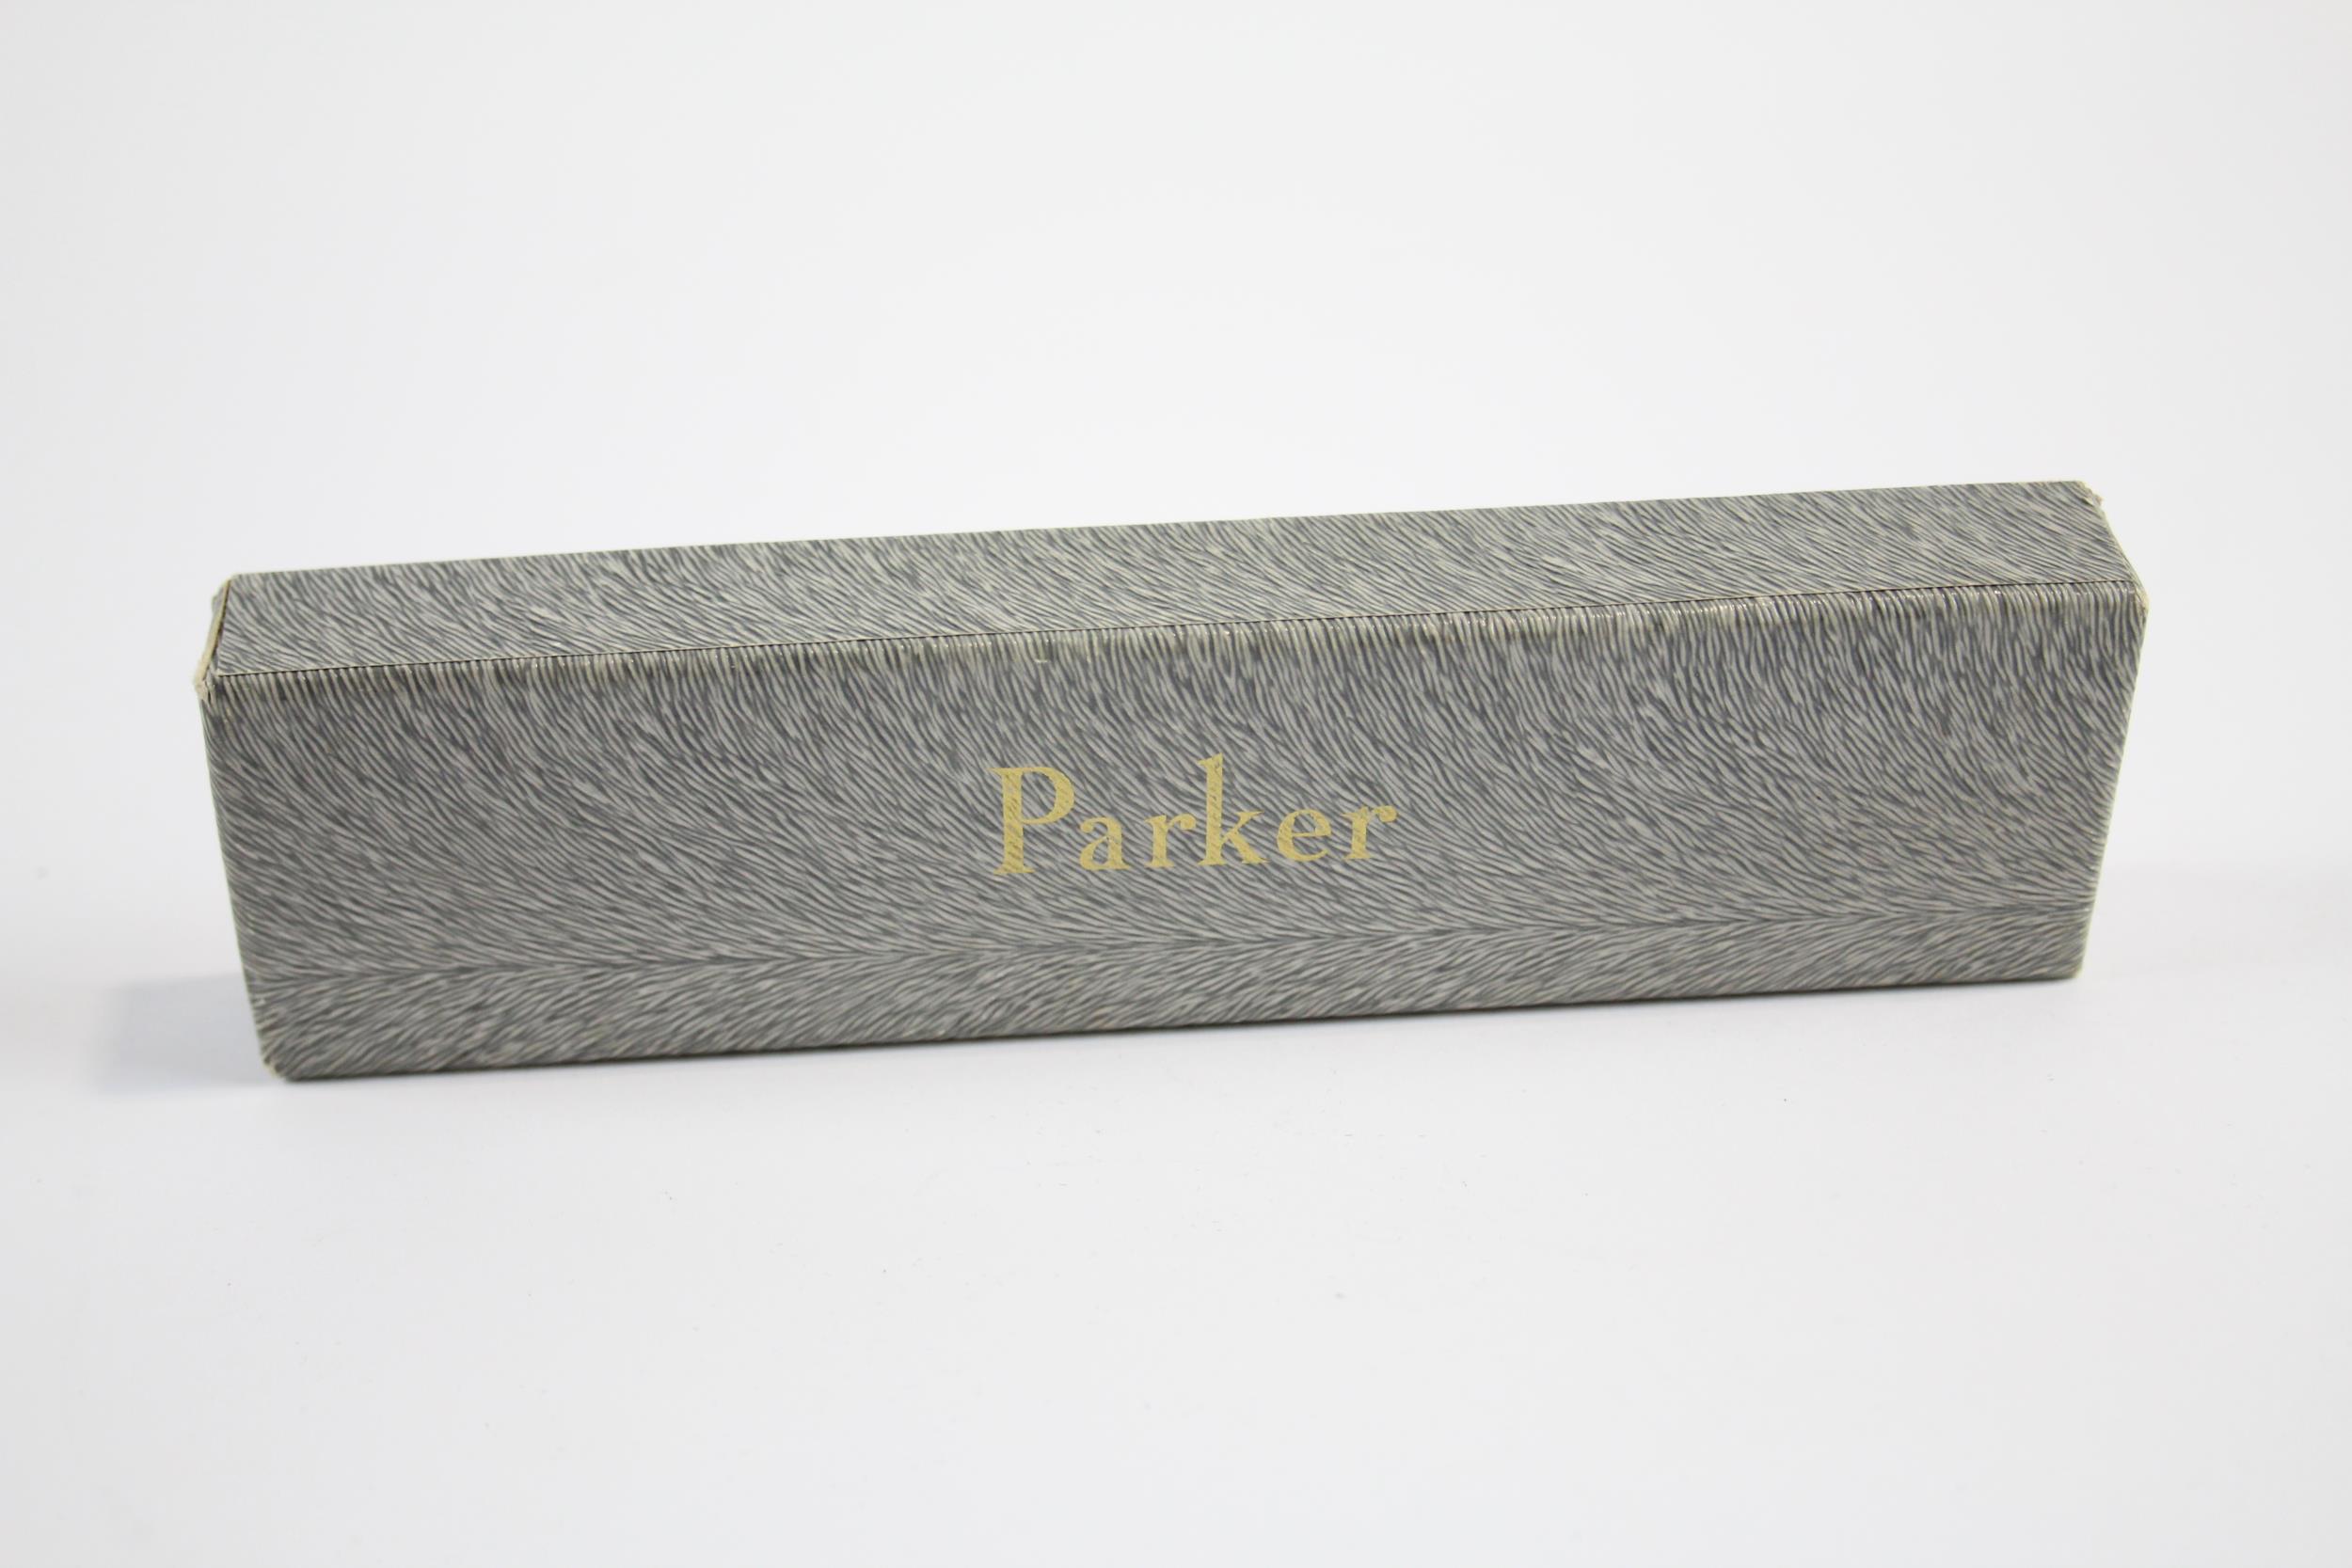 Vintage PARKER 51 Grey FOUNTAIN PEN w/ Rolled Silver Cap WRITING Boxed // Dip Tested & WRITING In - Image 5 of 5